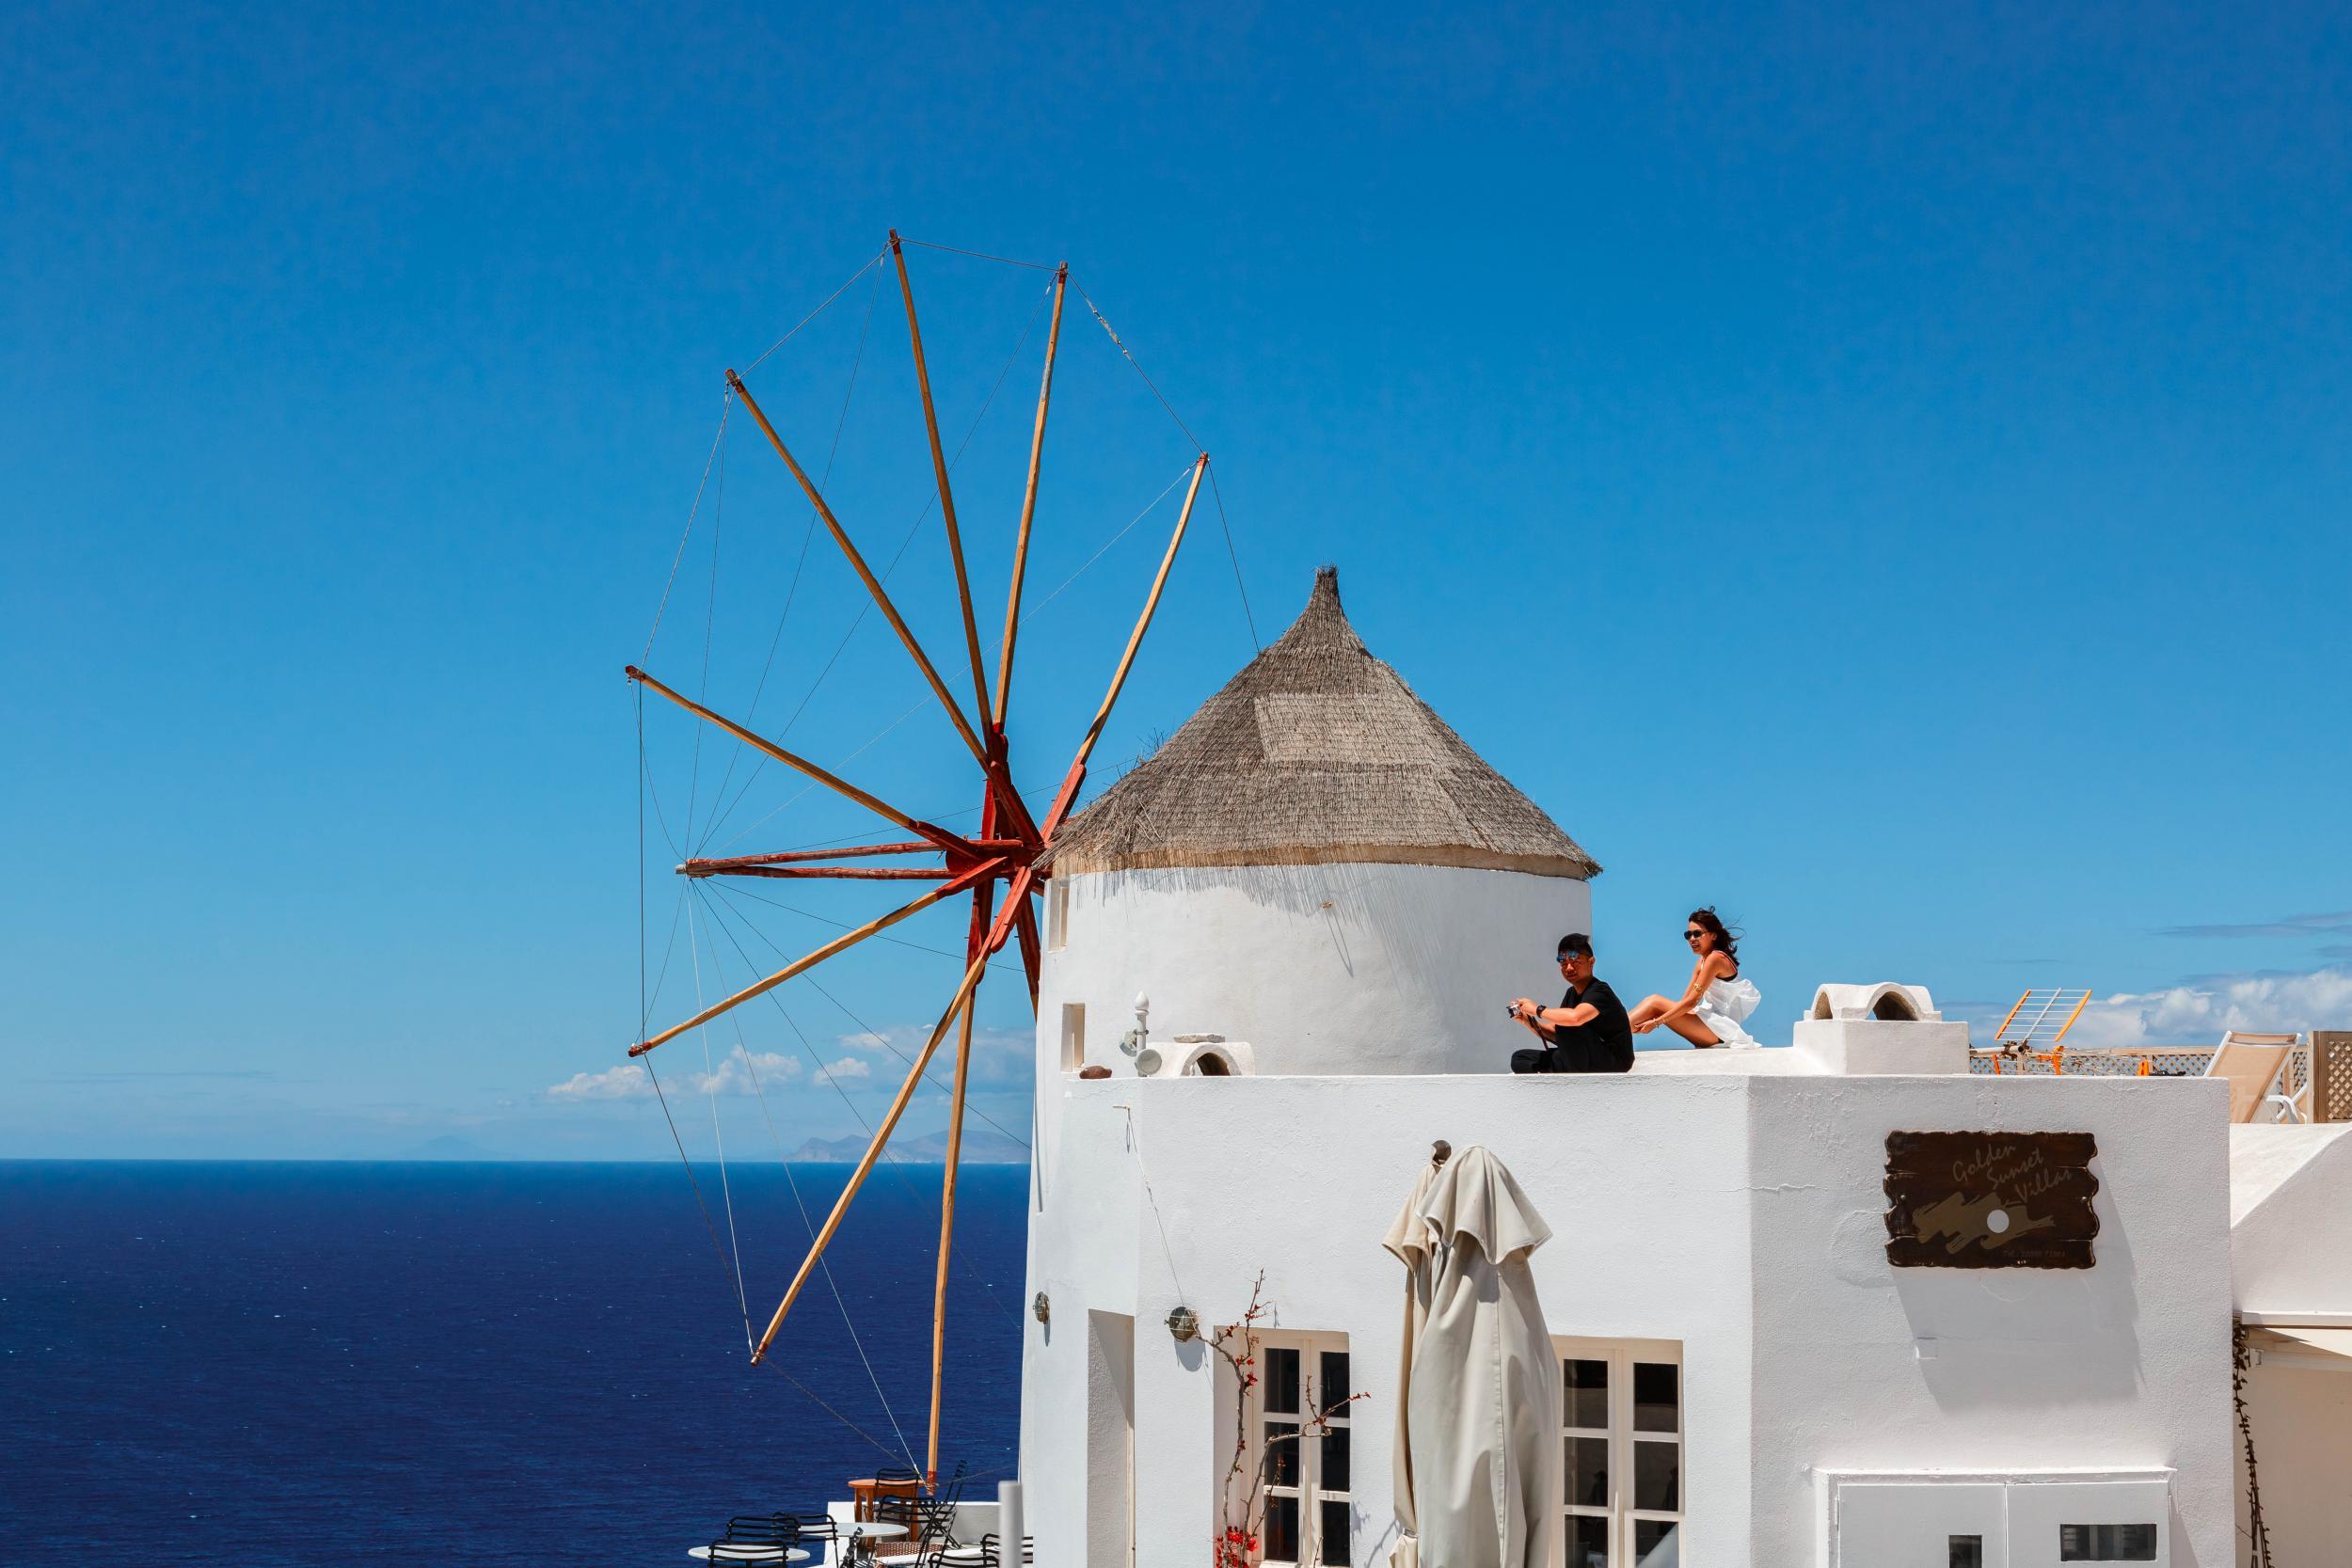 Holidays to the Med, including the Greek islands, are more expensive during the school holidays